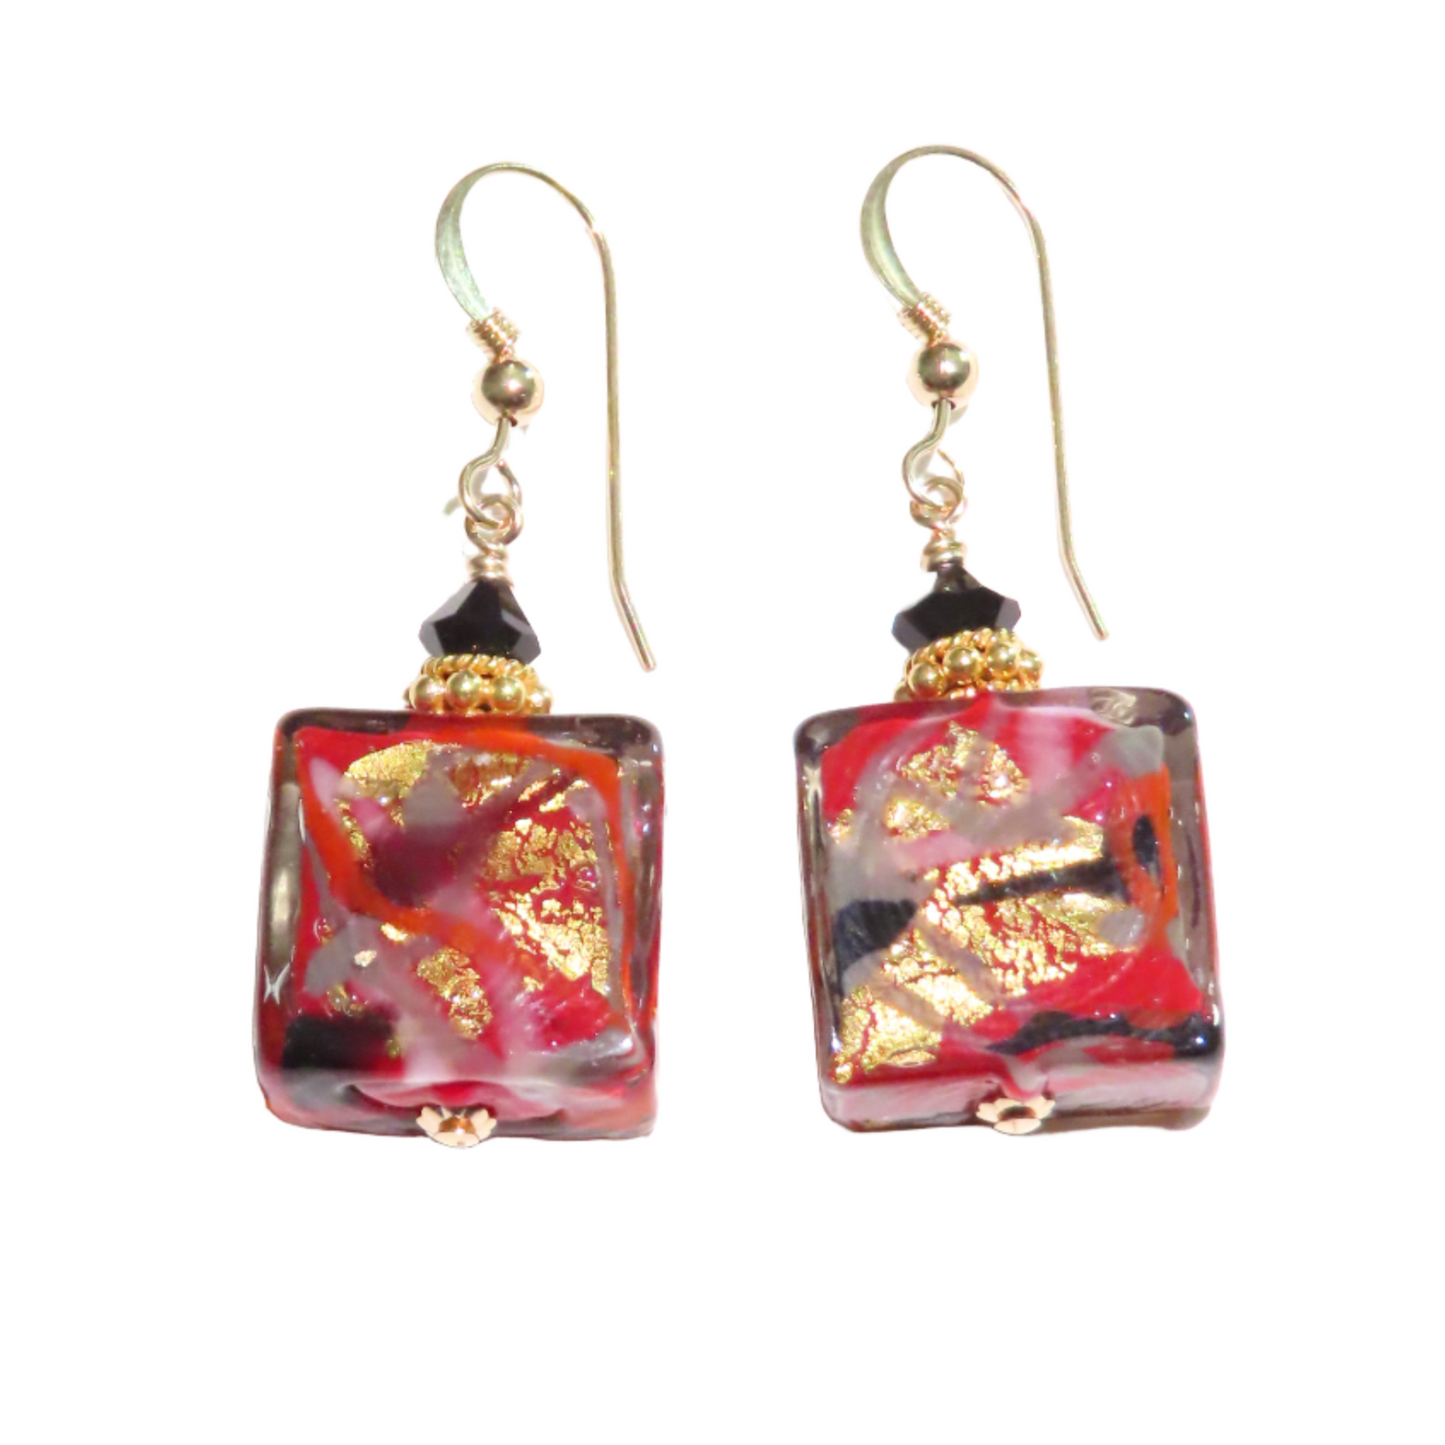 a pair of red and gold earrings on a white background